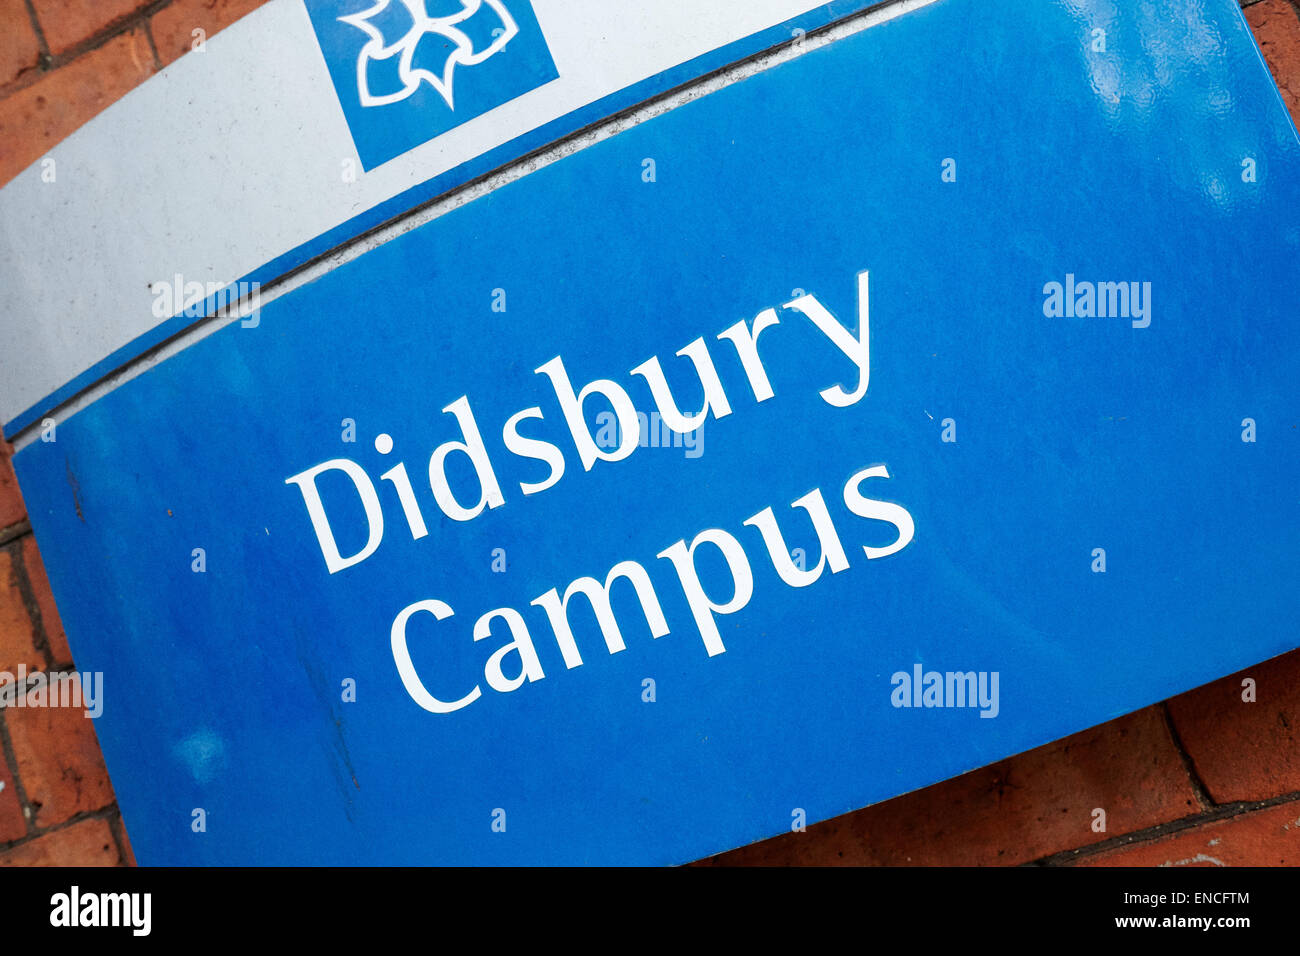 Now closed down Didsbury Manchester MMU university campus sign Stock Photo